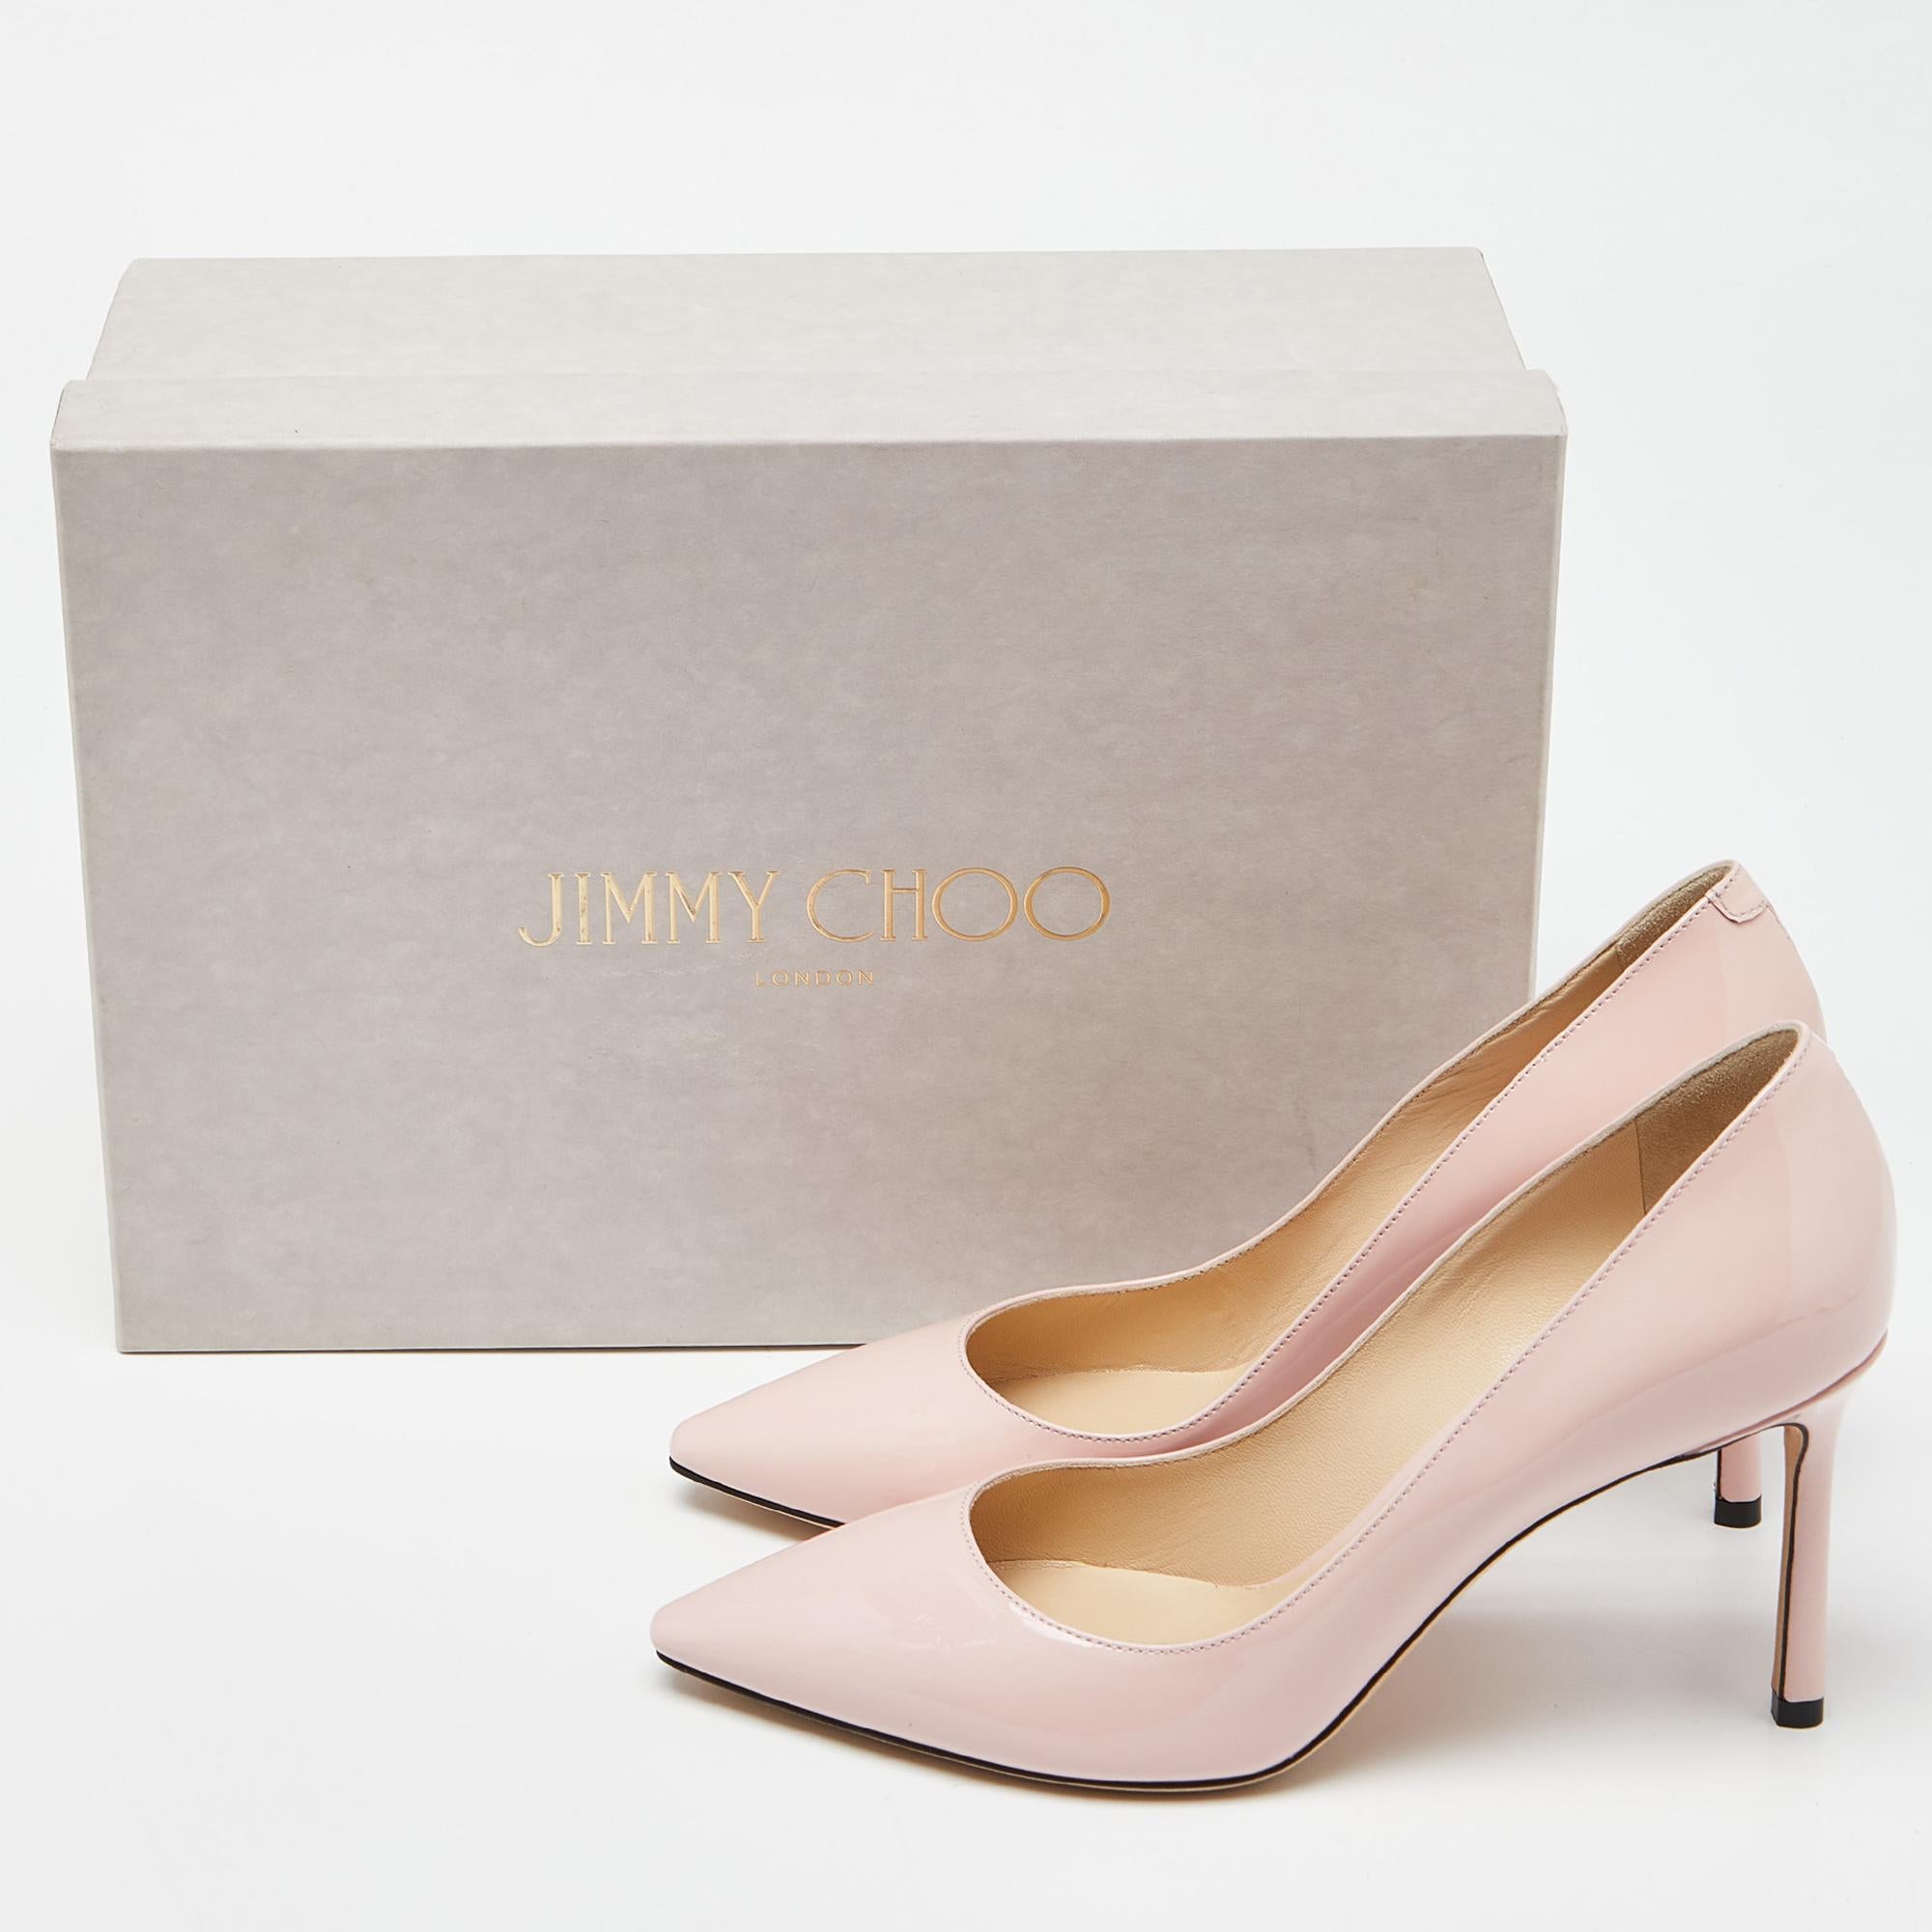 Jimmy Choo Pink Patent Leather Romy Pumps Size 37.5 For Sale 5